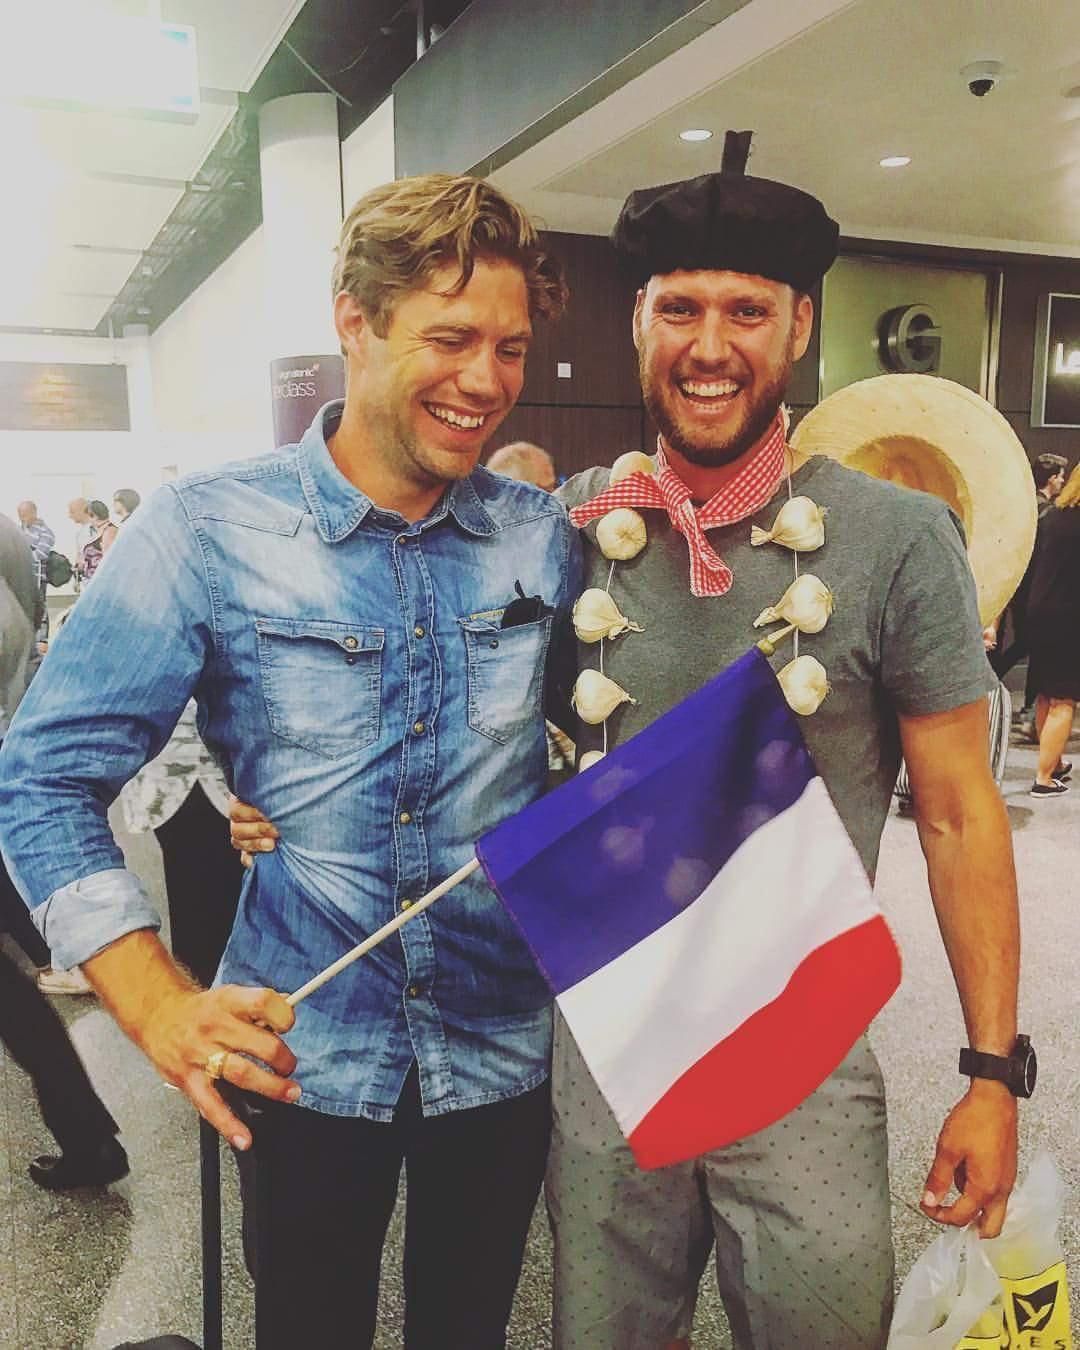 English guy picking up his French friend at the airport.